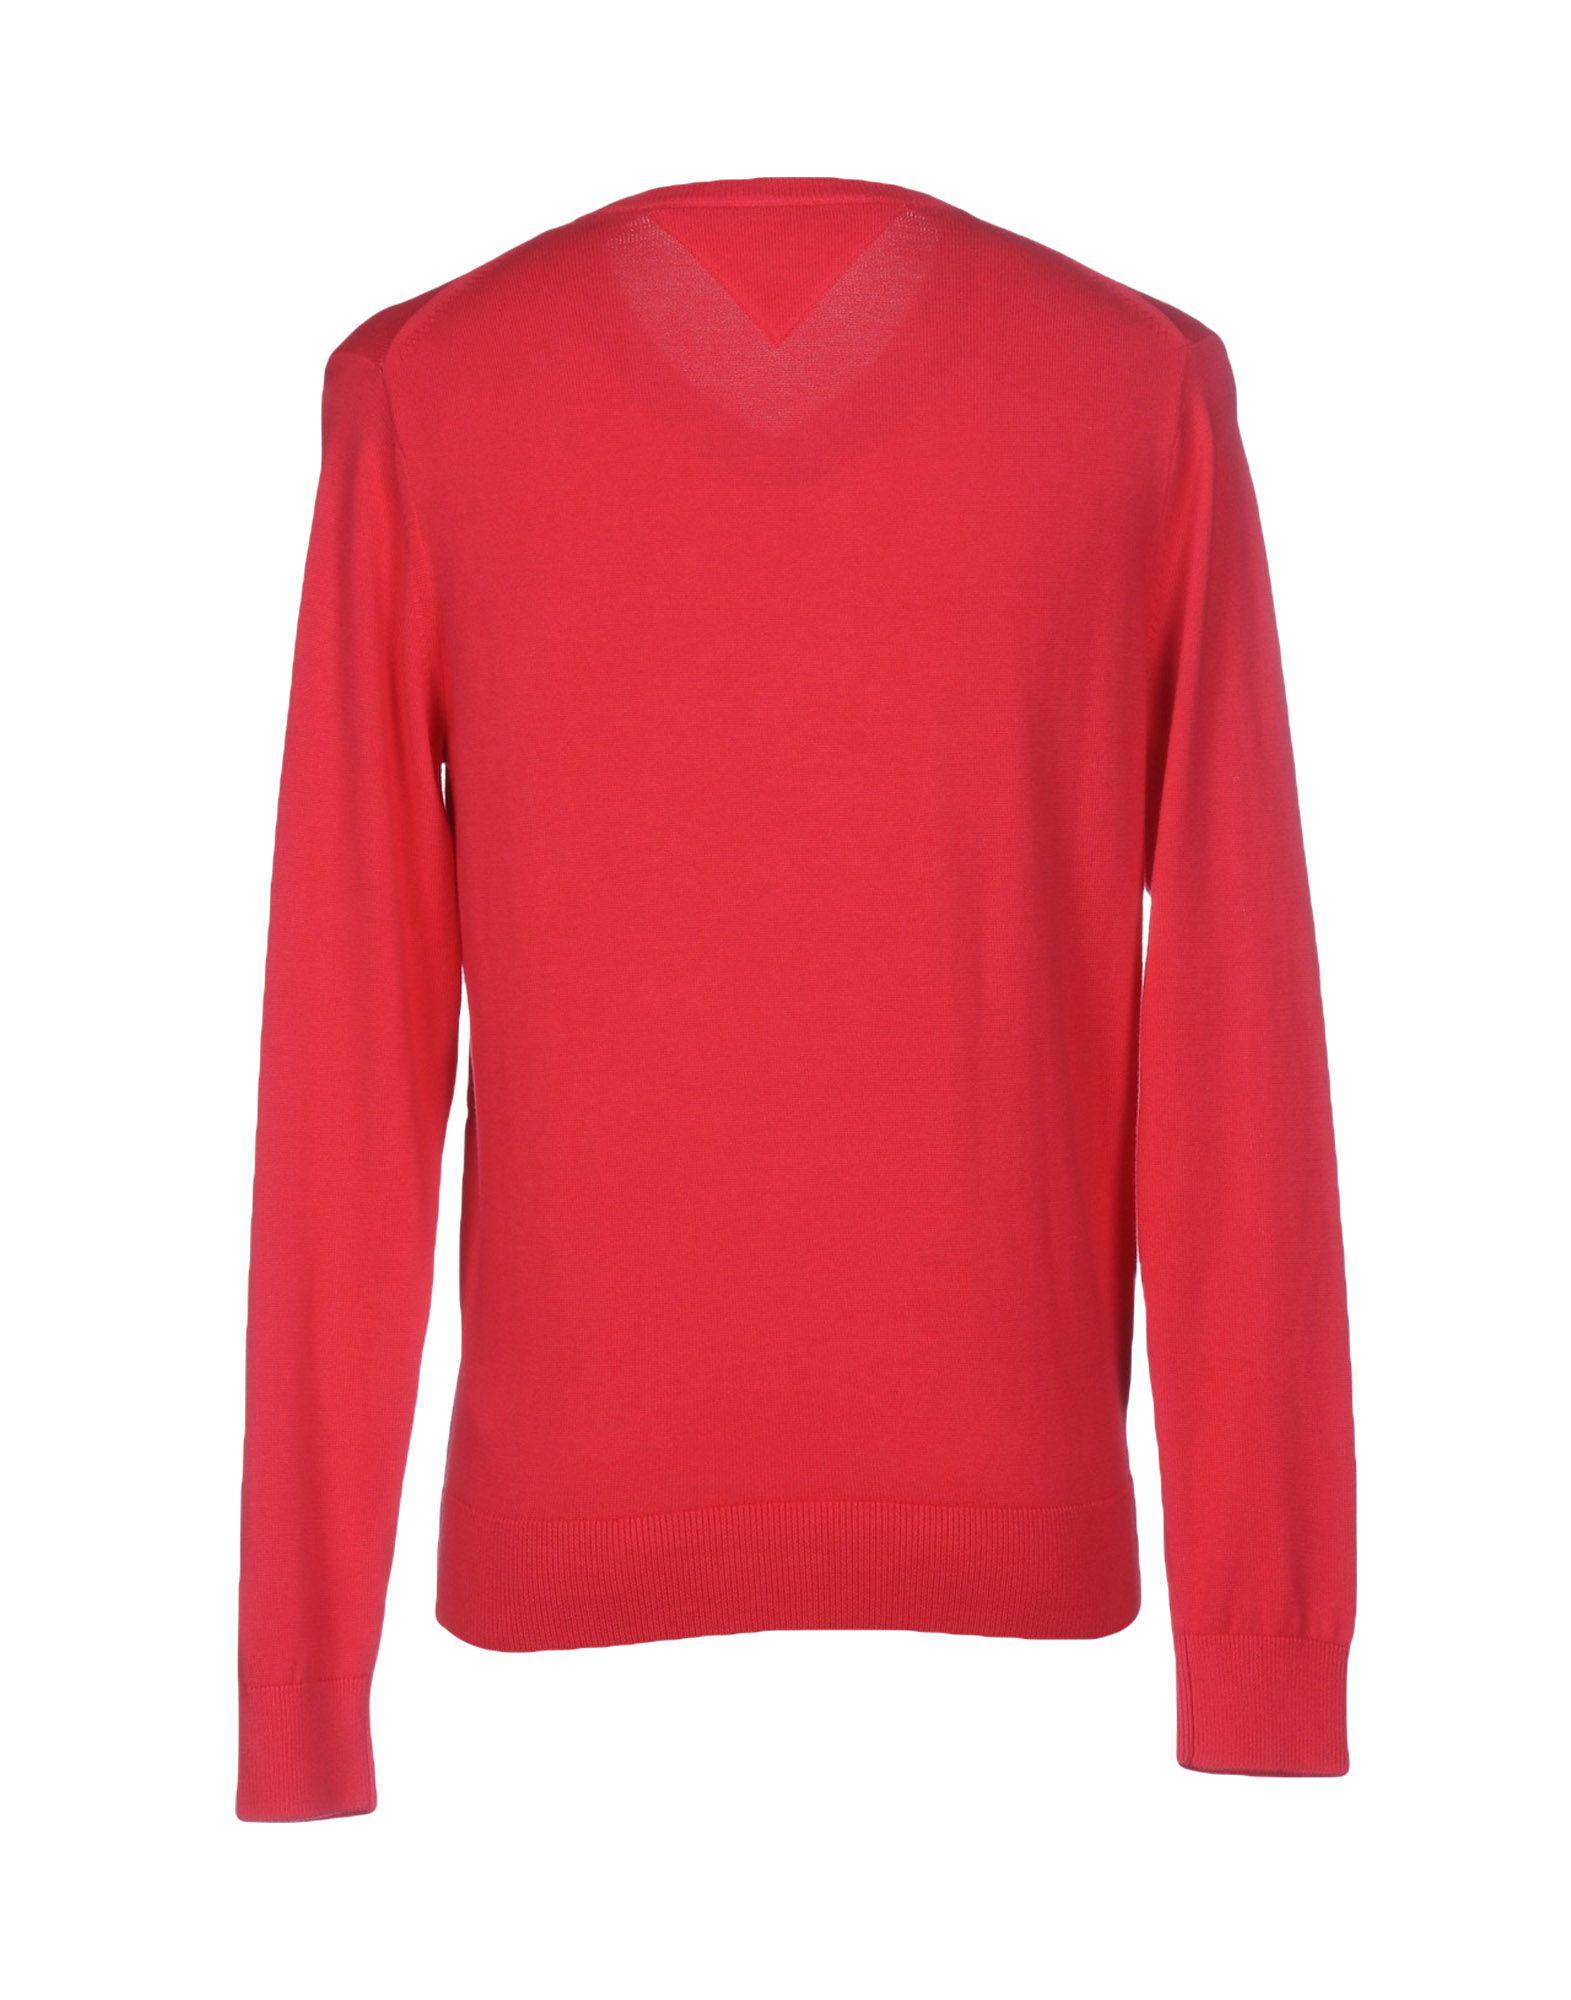 Lyst - Tommy Hilfiger Sweater in Red for Men